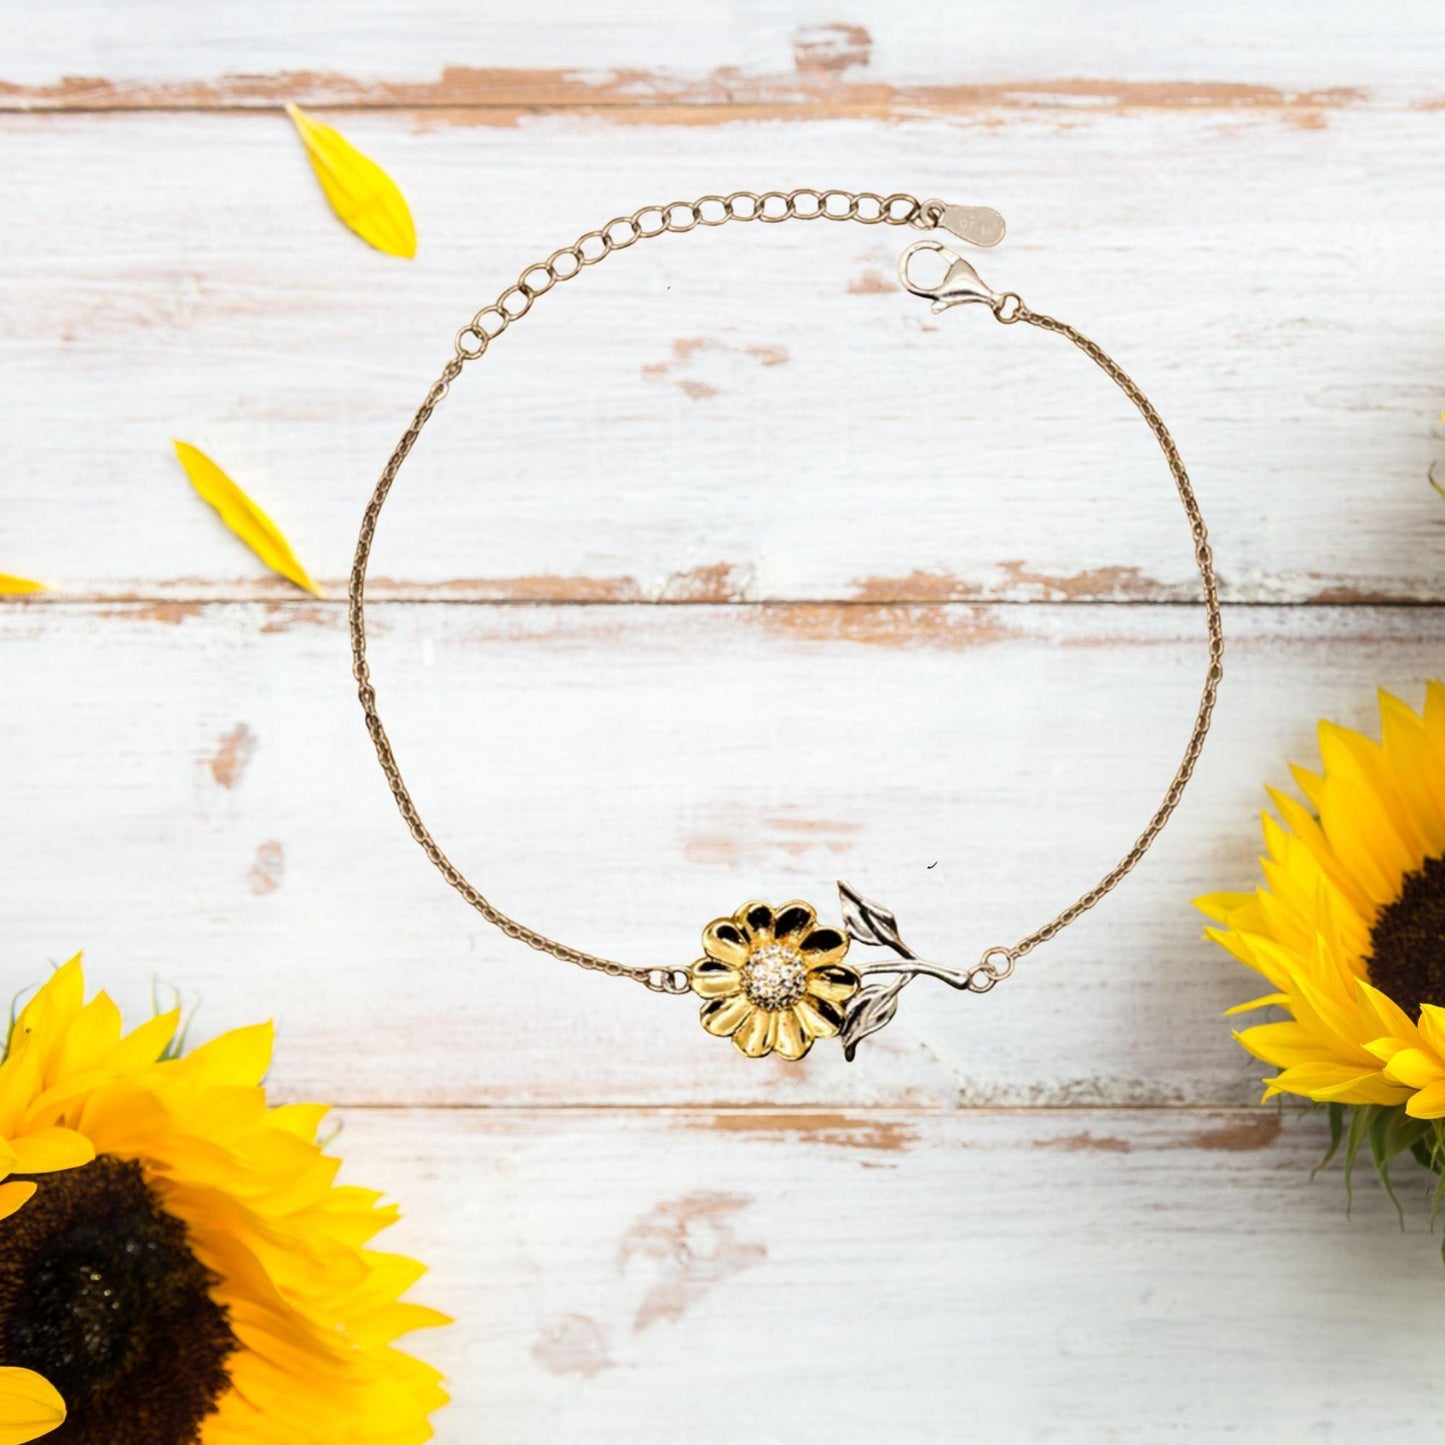 Accountant Sunflower Bracelet - Thanks for being who you are - Birthday Christmas Jewelry Gifts Coworkers Colleague Boss - Mallard Moon Gift Shop